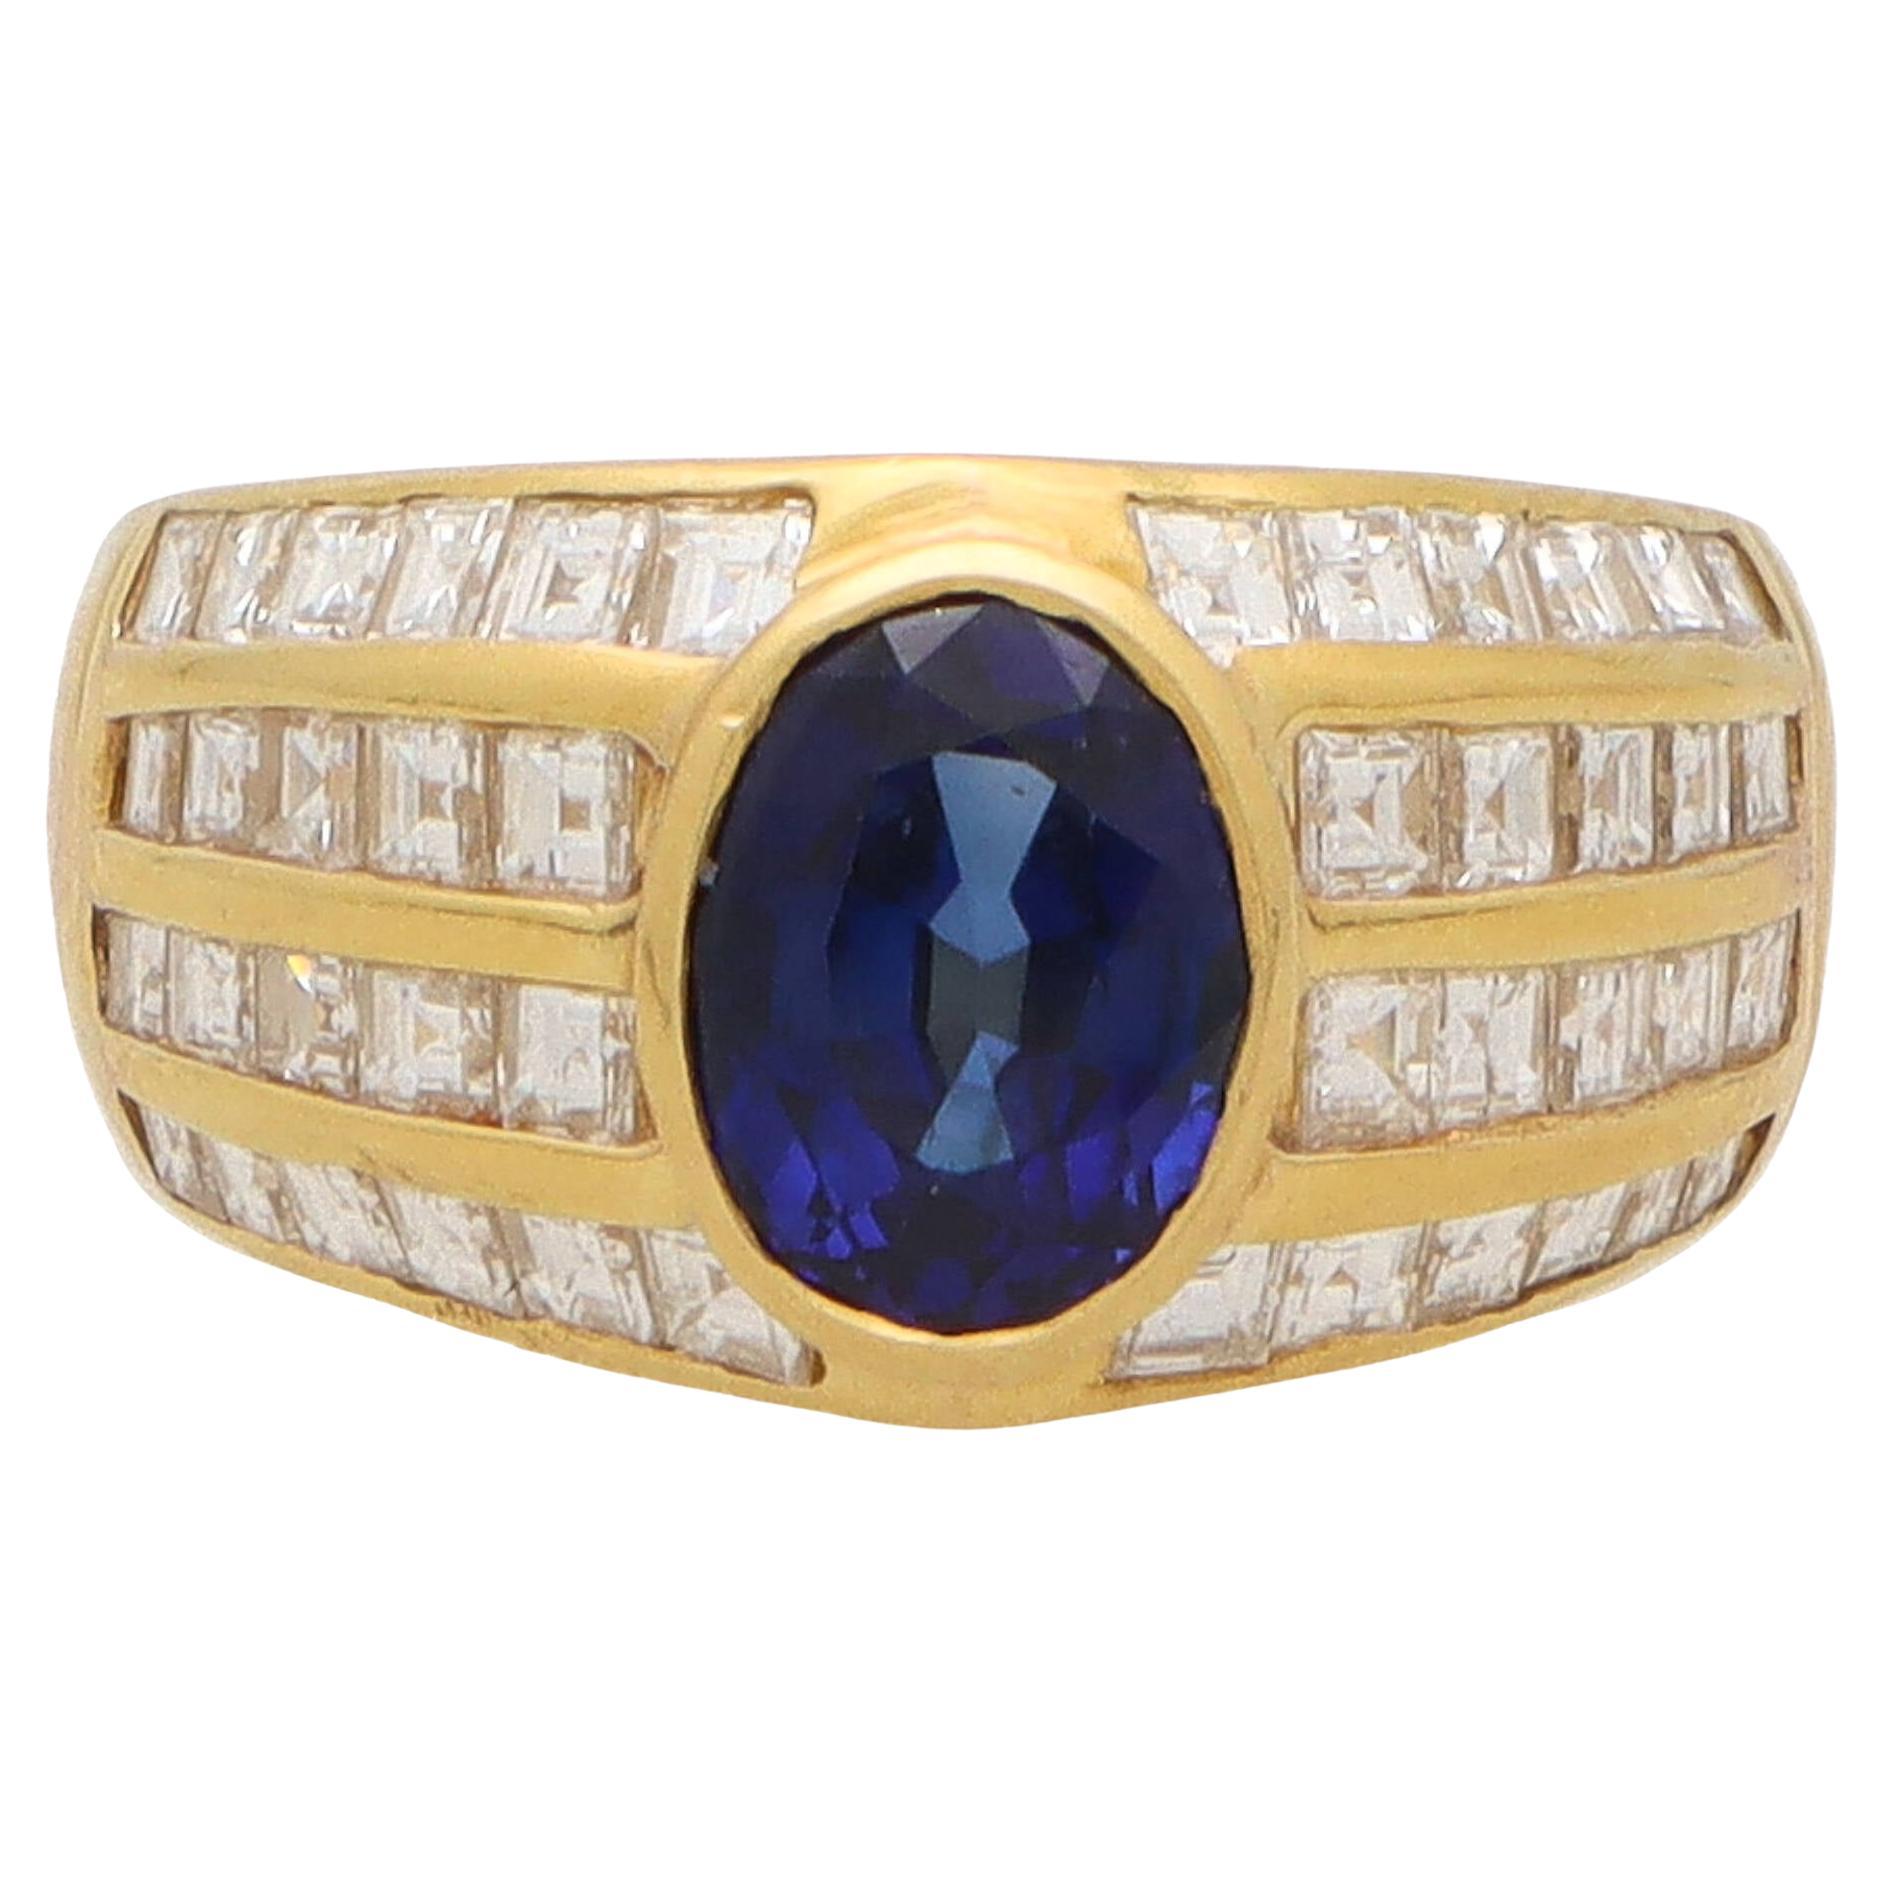  Vintage 1980's Blue Sapphire and Diamond Dress Ring in 18k Yellow Gold For Sale